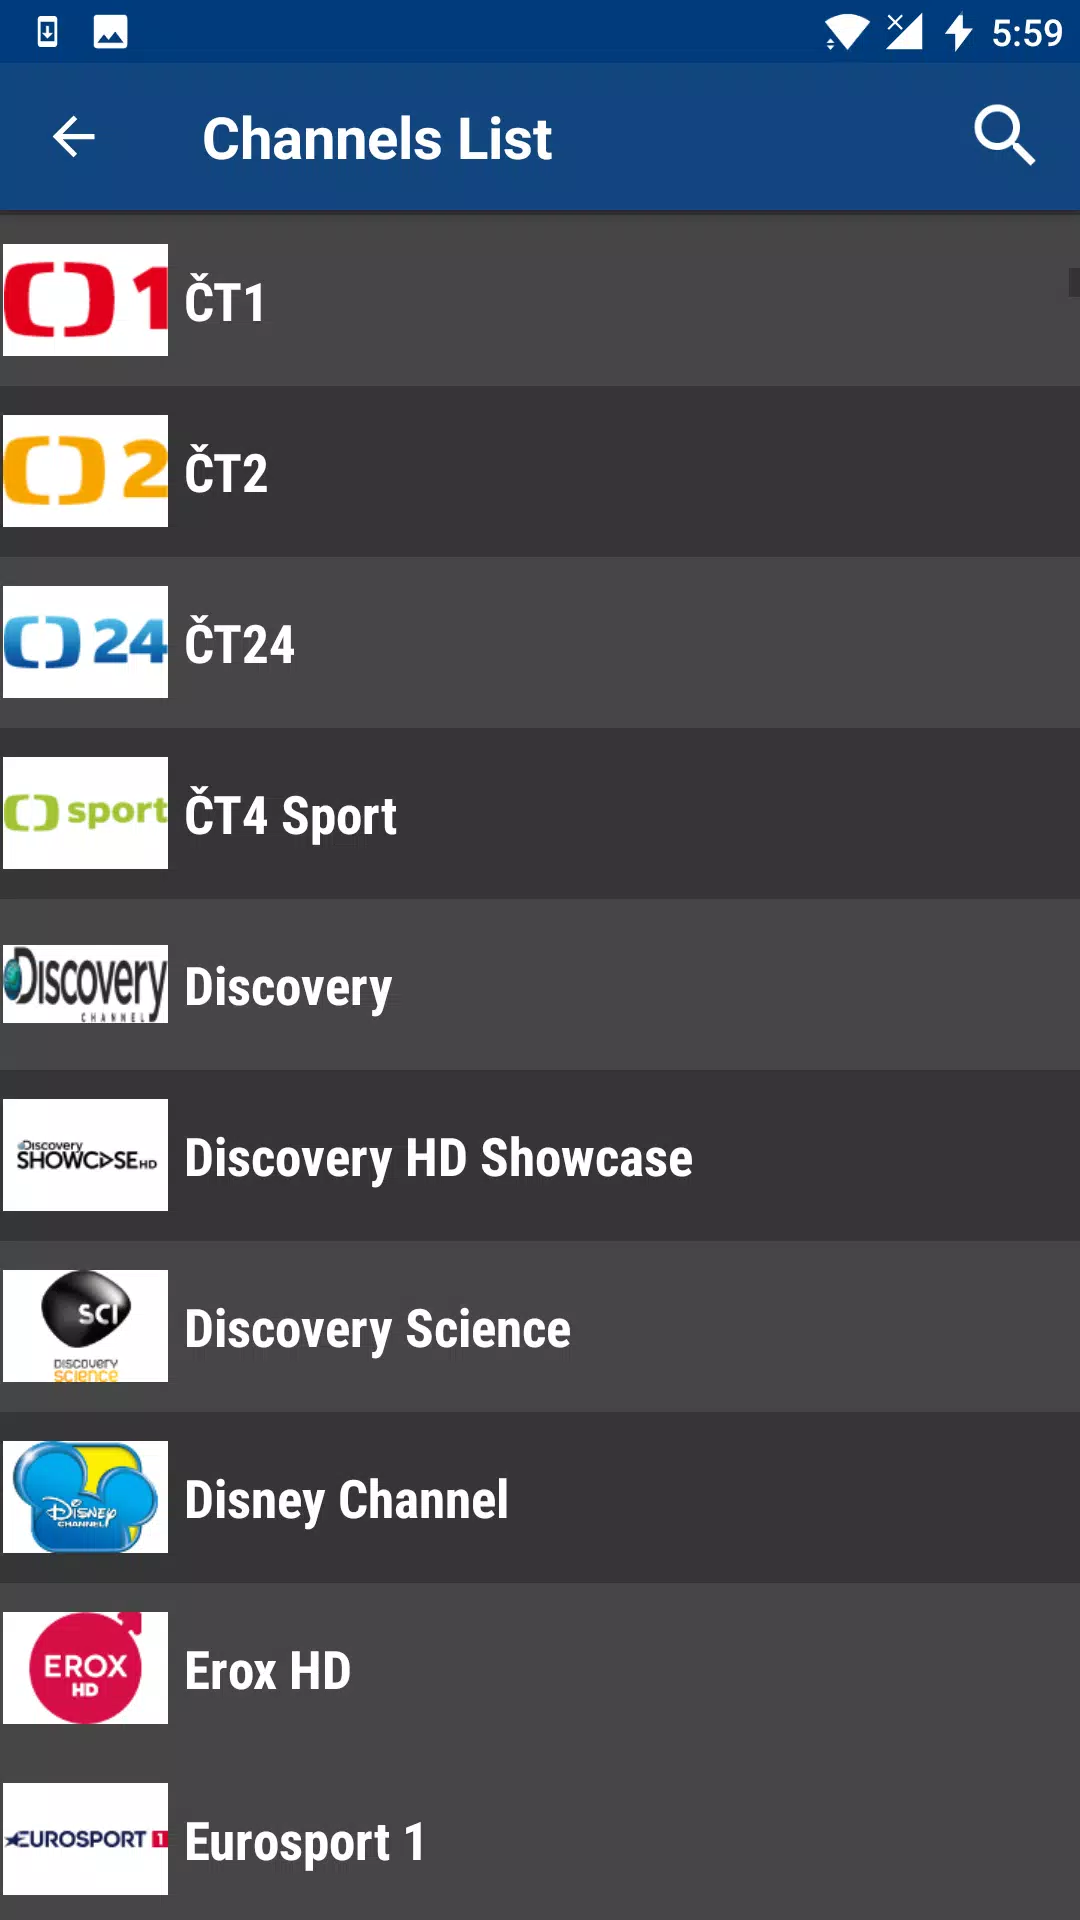 Czech TV Today - Free TV Schedule APK for Android Download